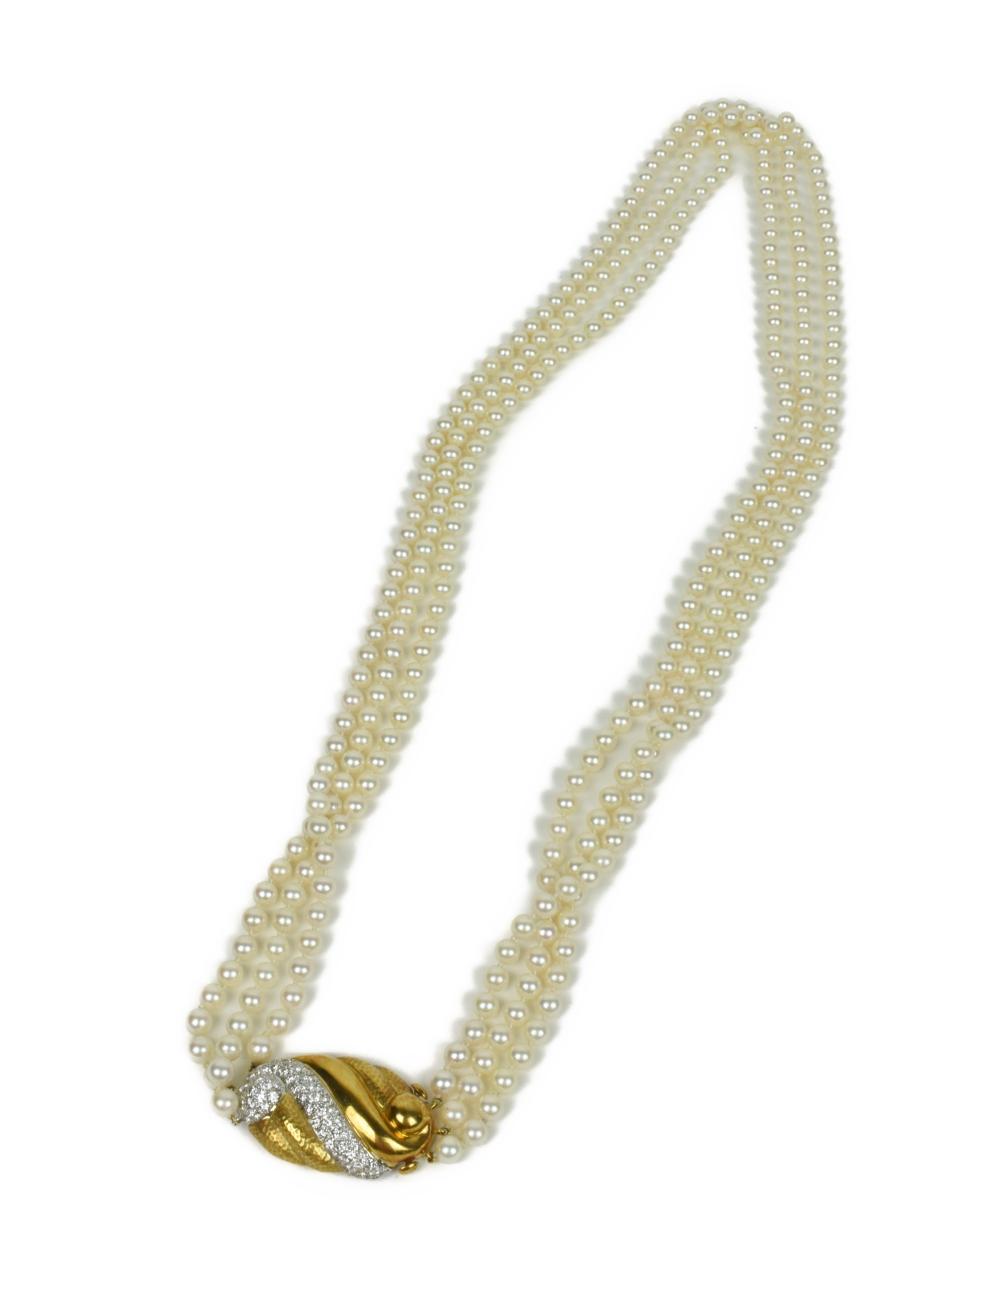 LADIES 18KT.GOLD, PEARLS, AND DIAMONDS